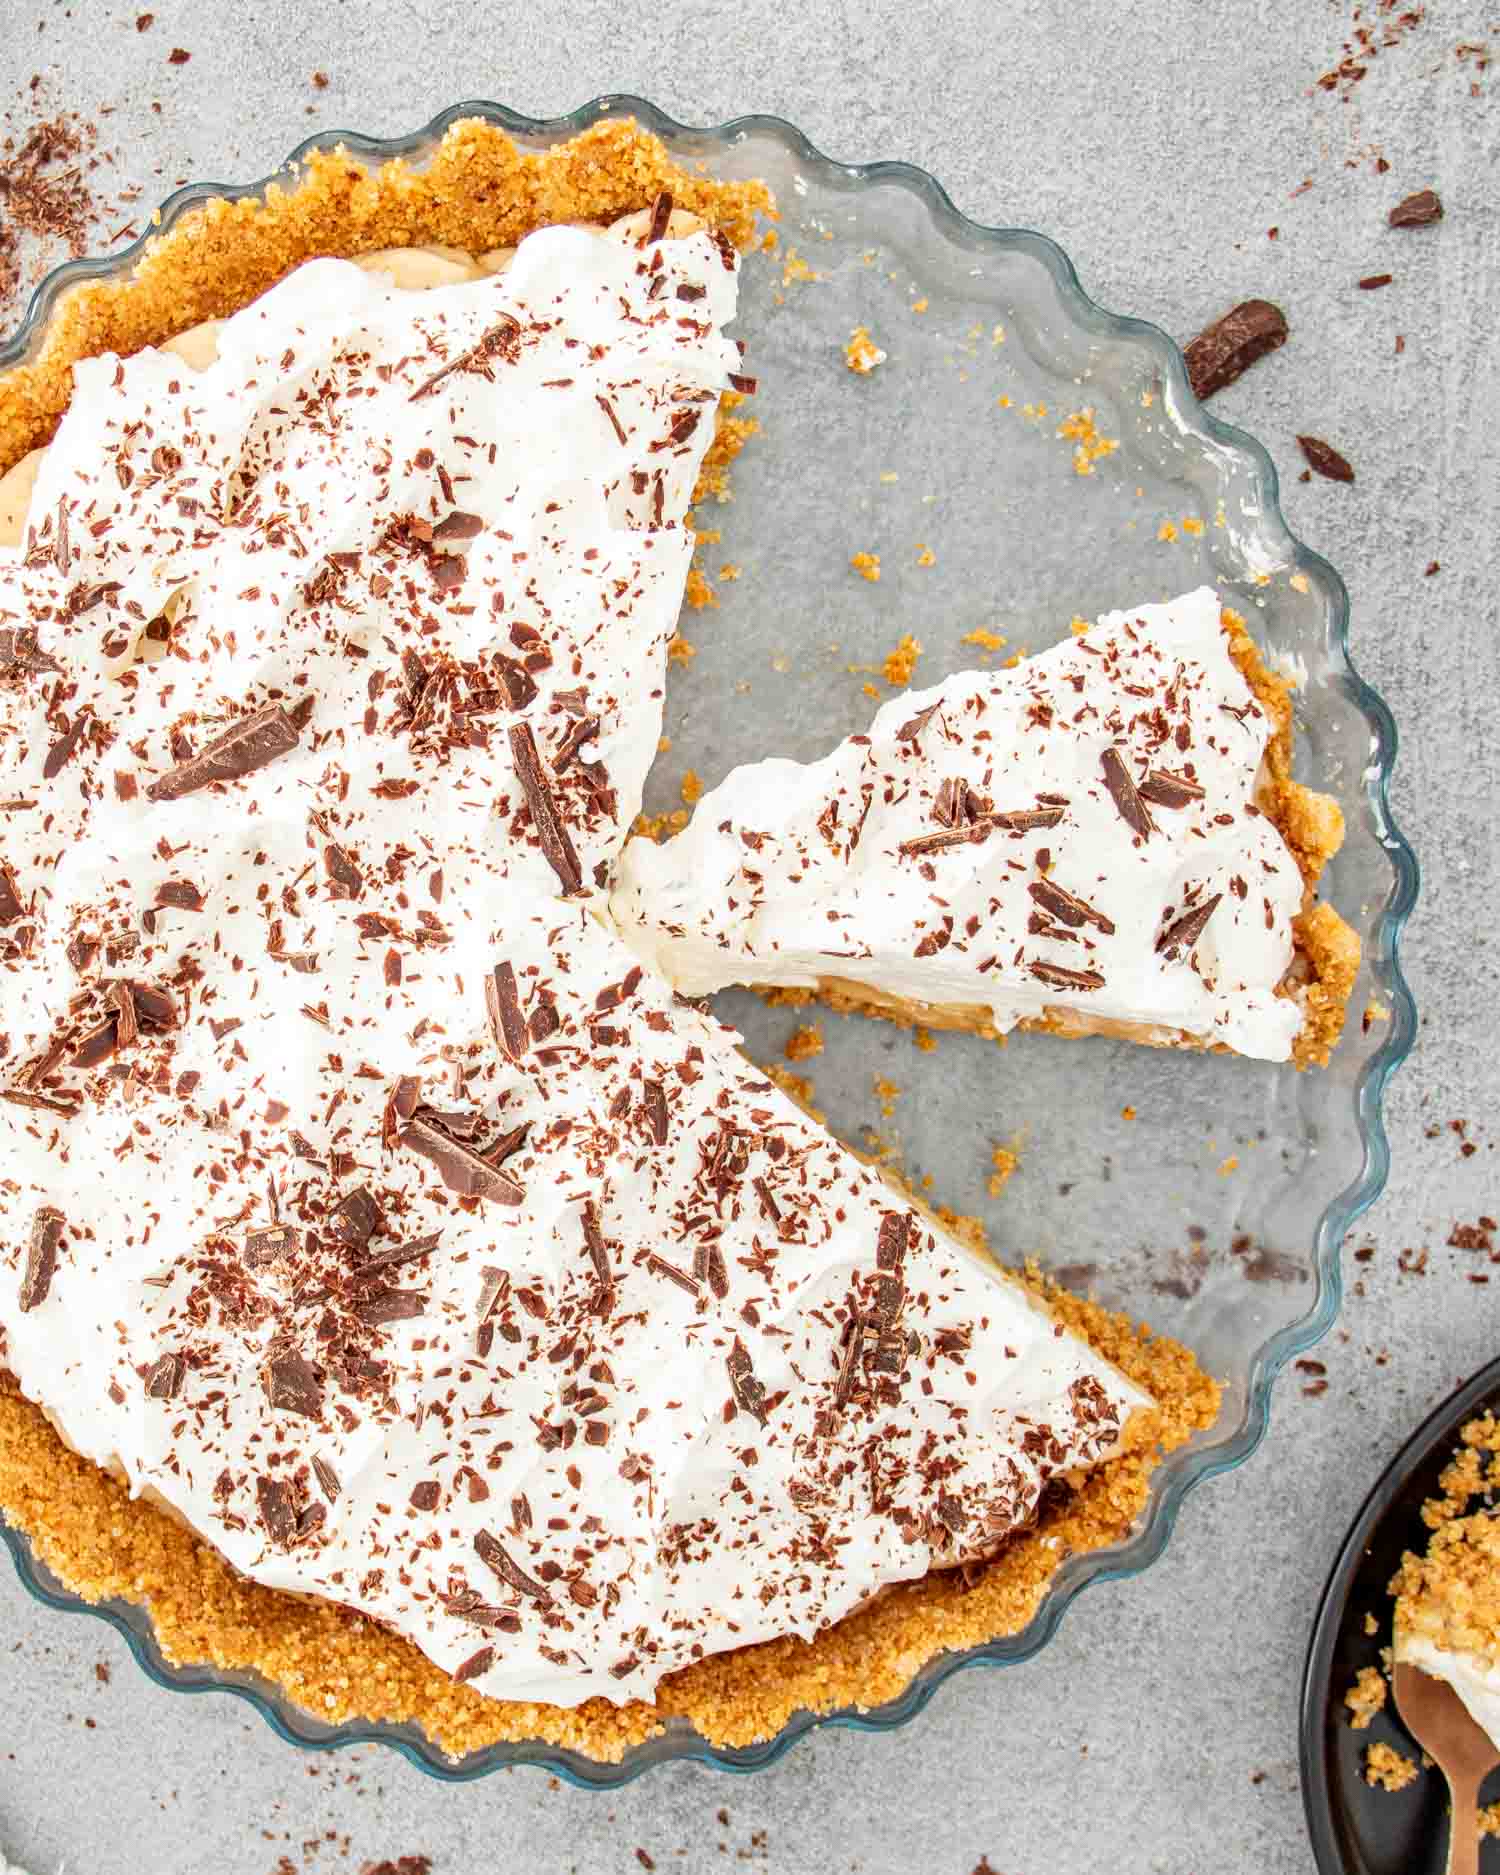 freshly made banoffee pie on a pie plate.